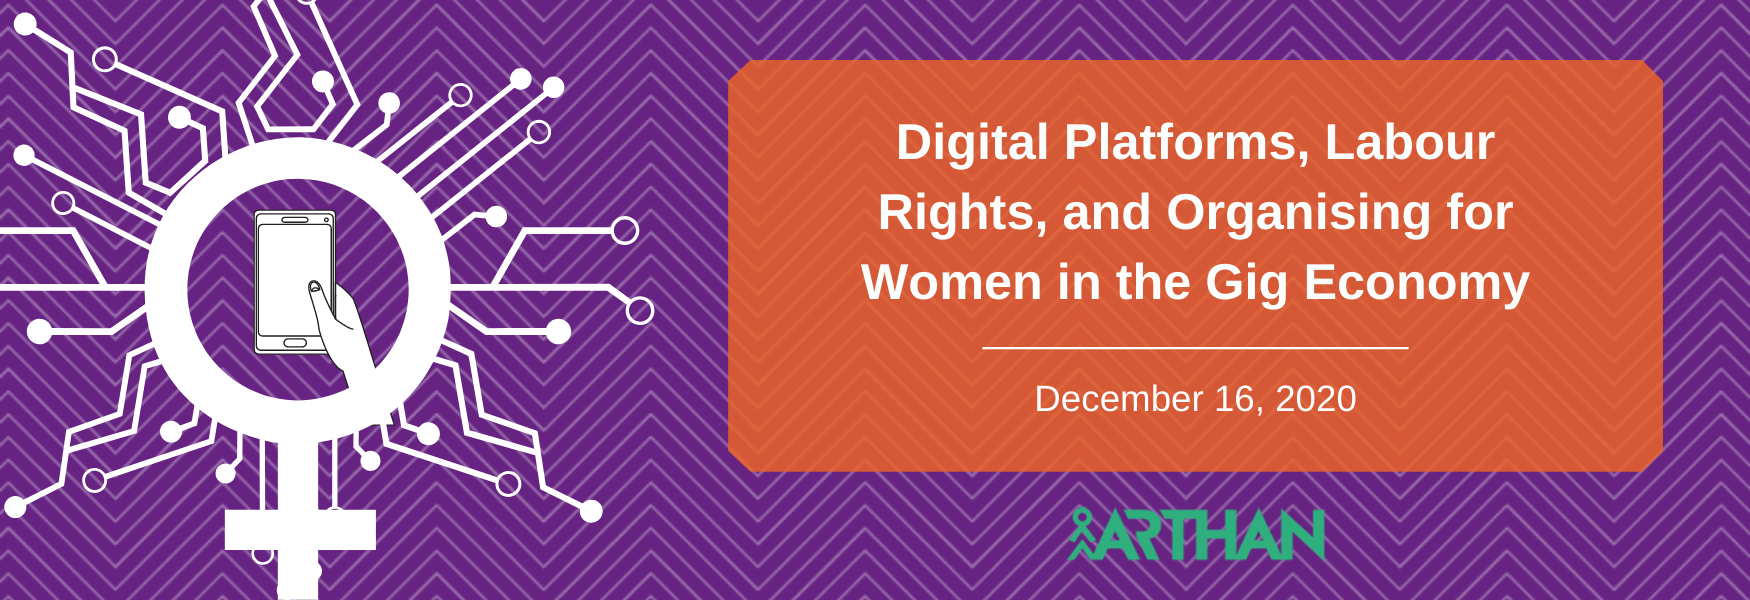 Digital Platforms, Labour Rights, and Organising for Women in the Gig Economy